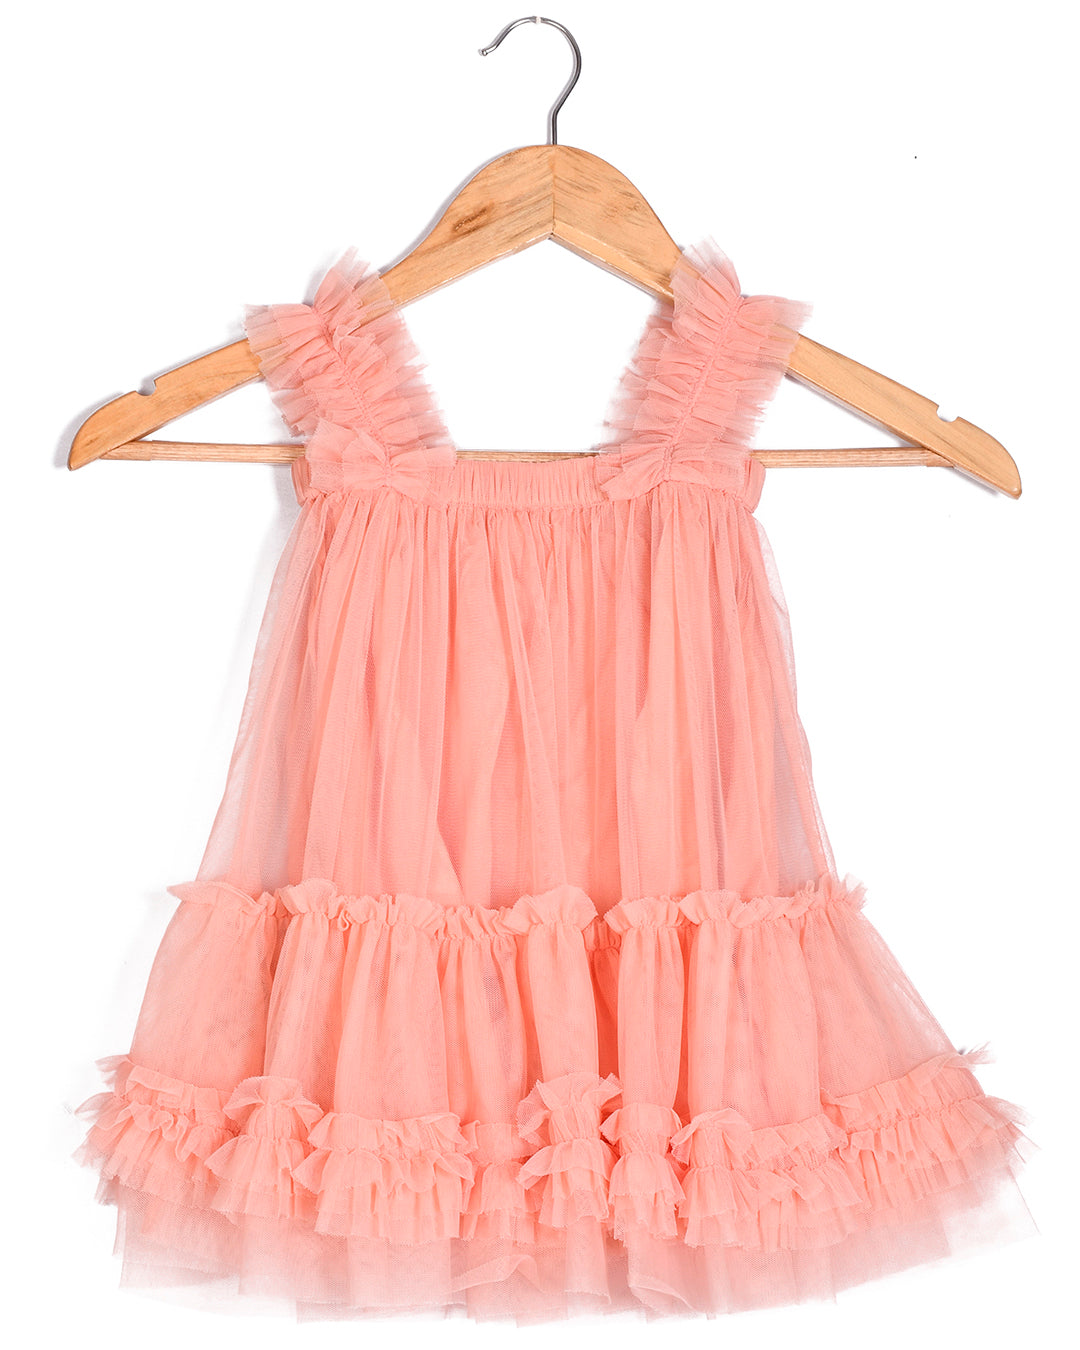 FRILLY PARTY TWINNING DRESS IN A SOFT PEACH